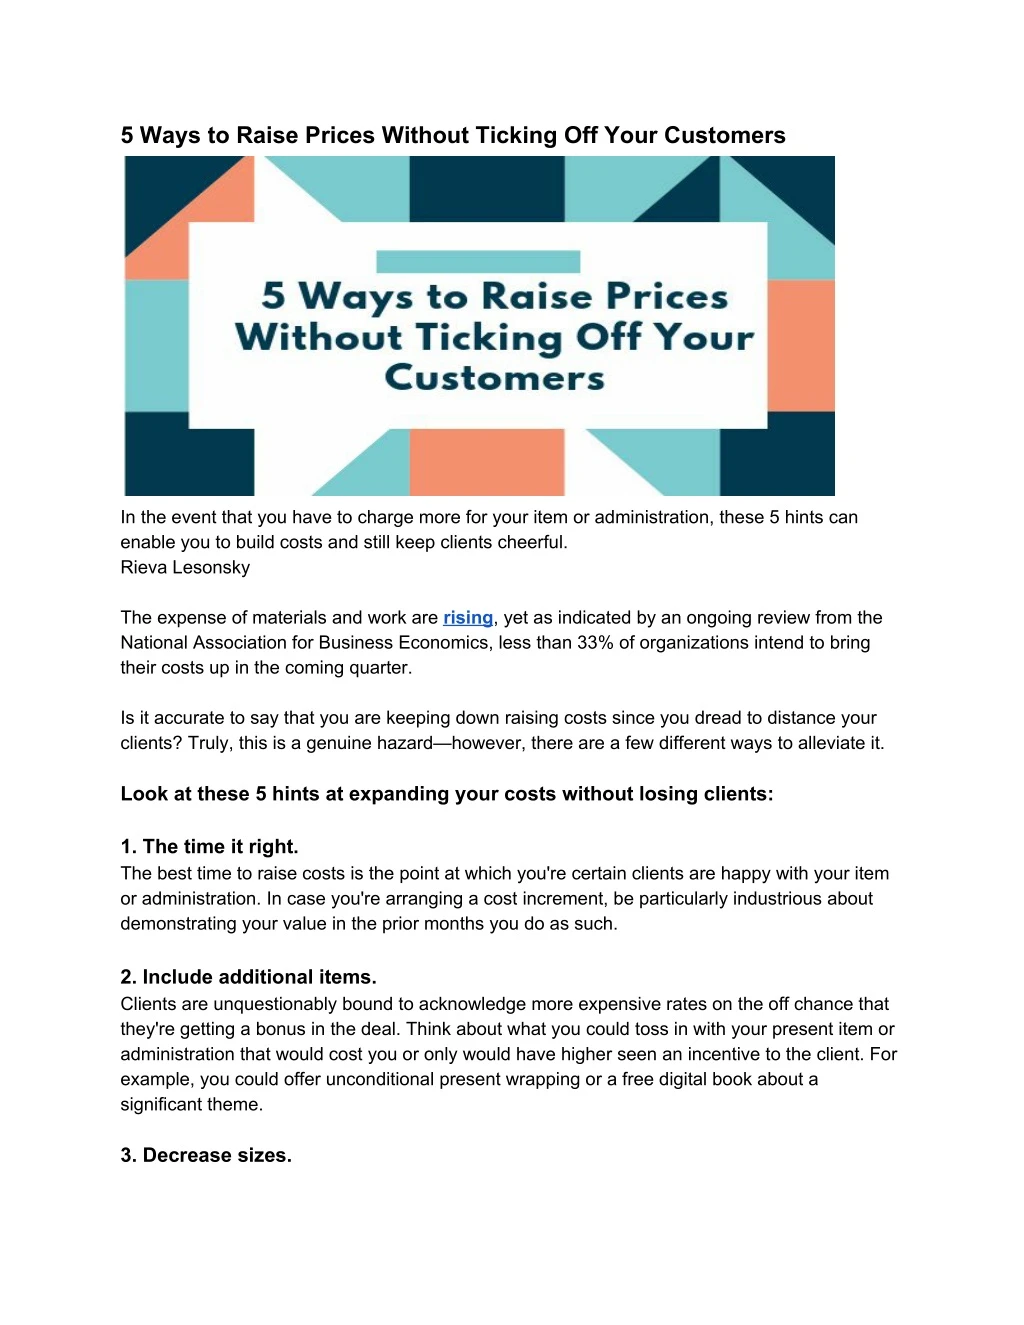 5 ways to raise prices without ticking off your